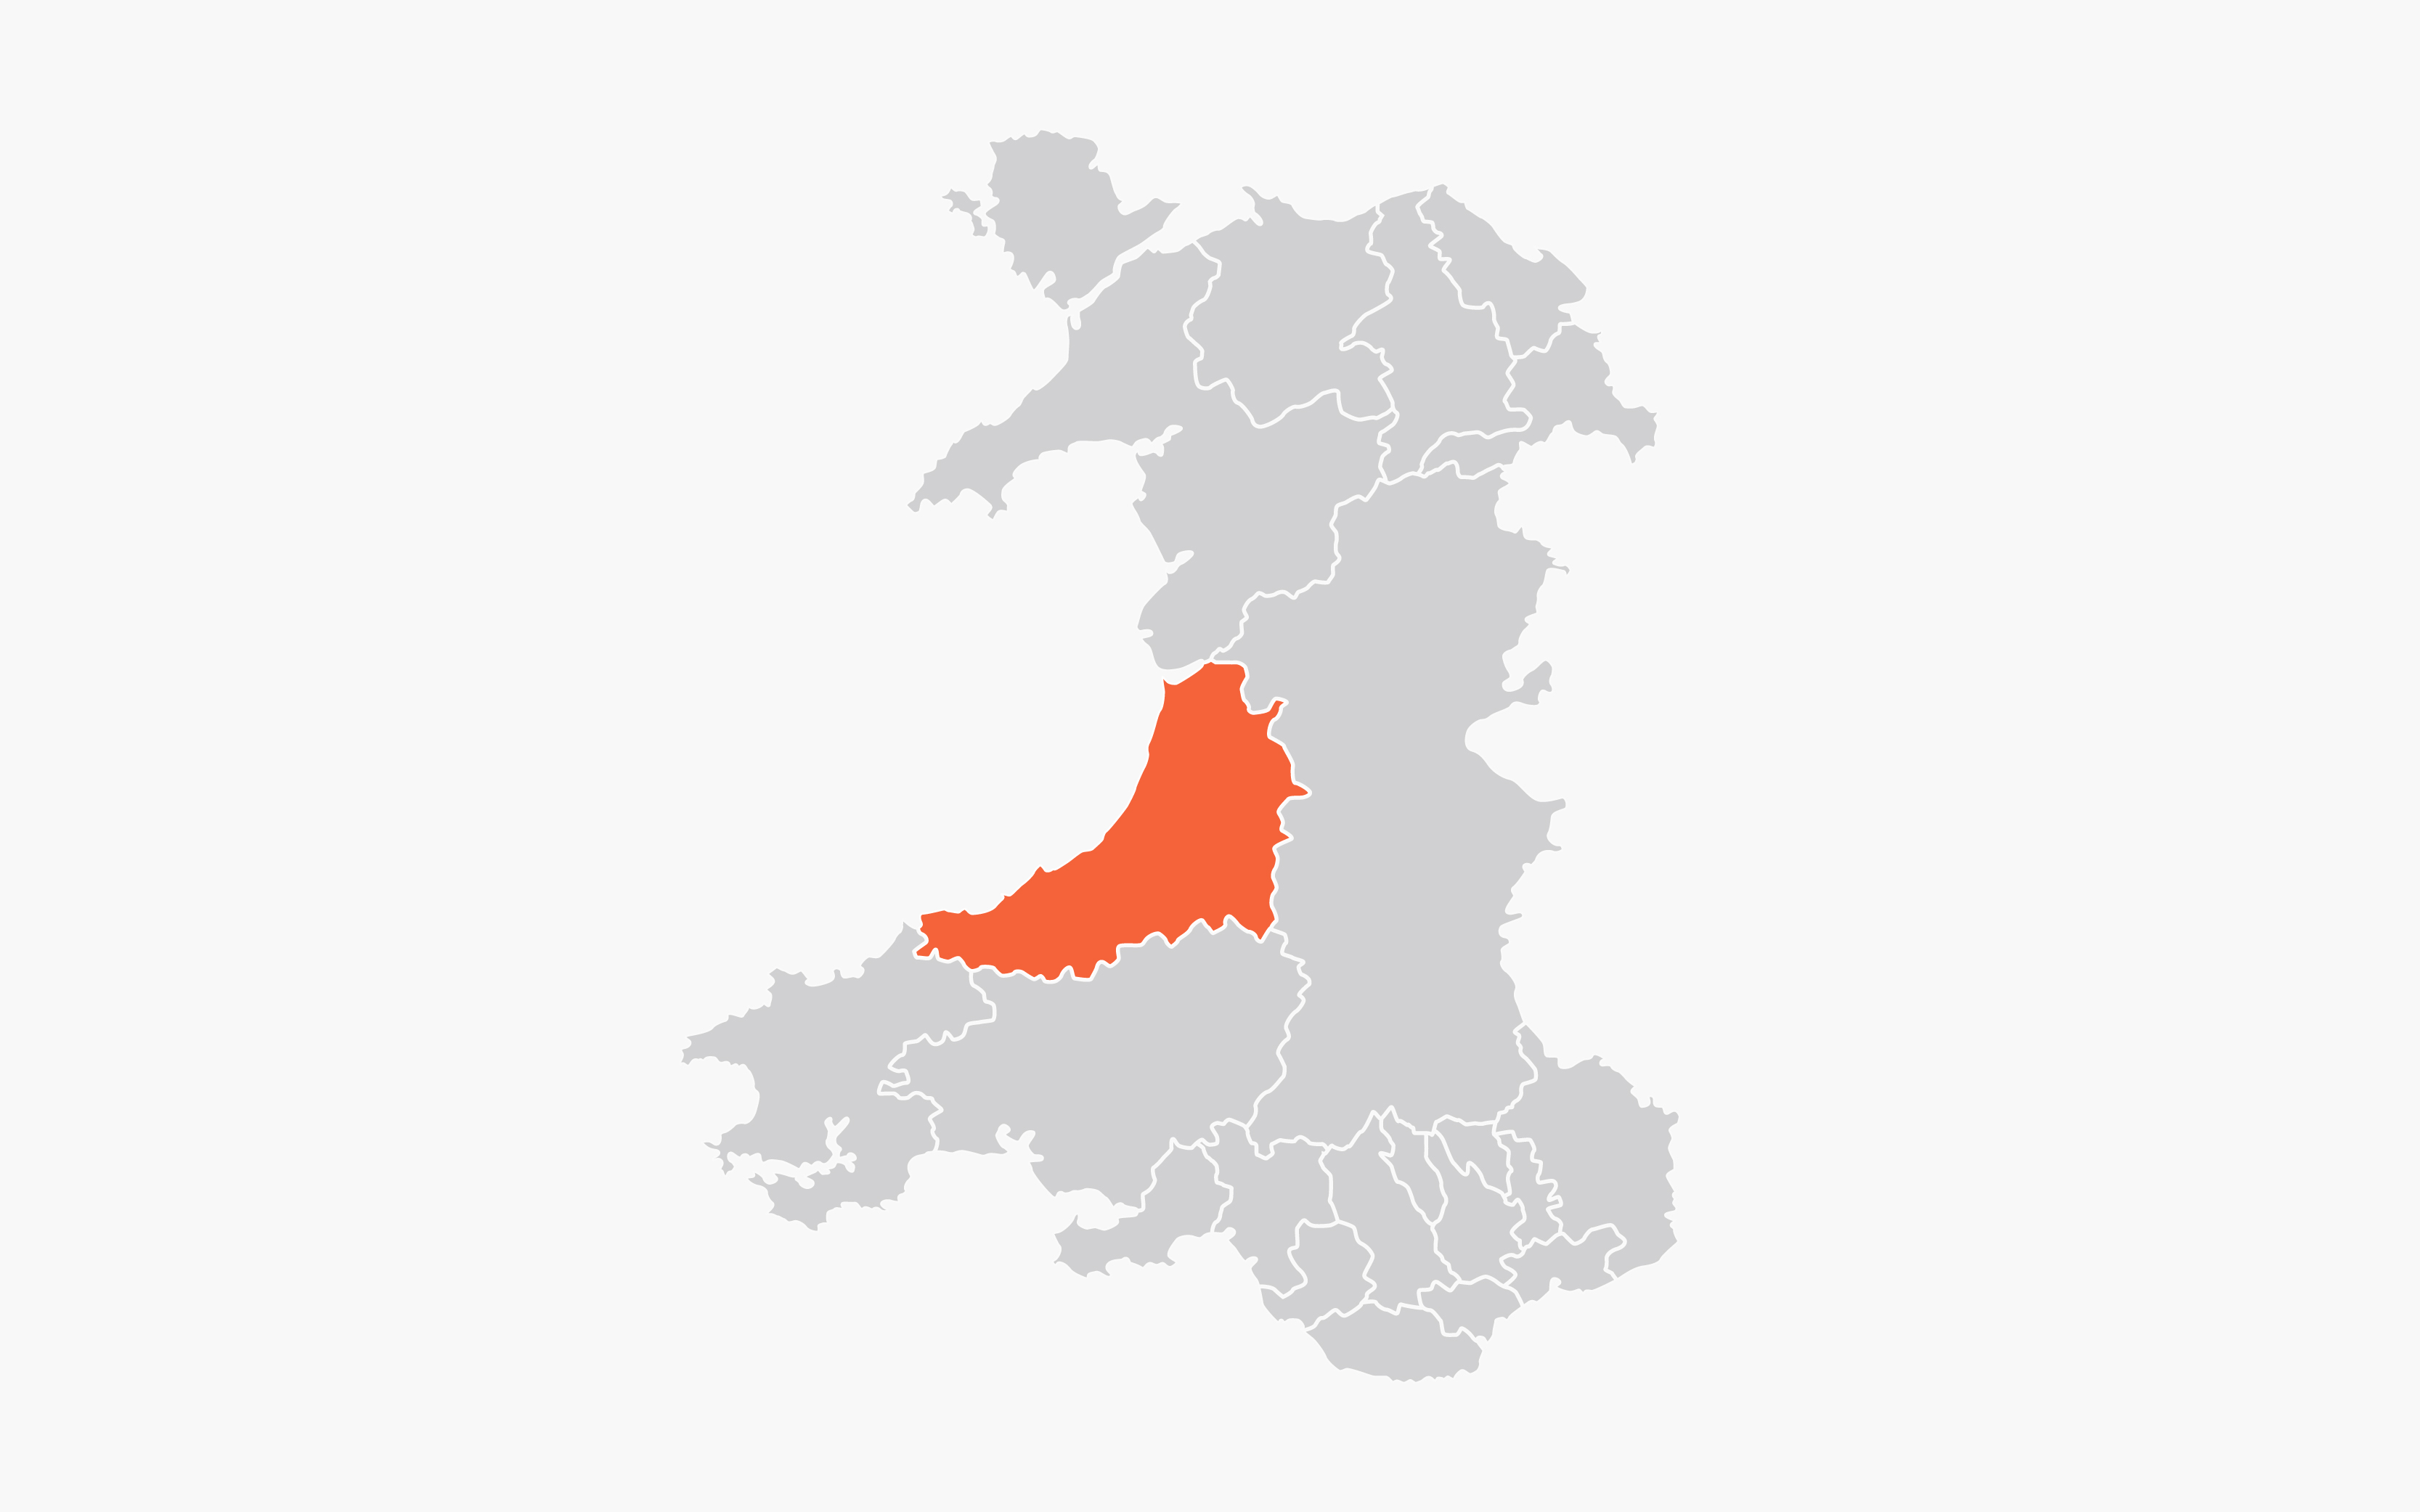 Illustrated map showing the Unitary authorities of Wales, with Ceredigion highlighted in orange.